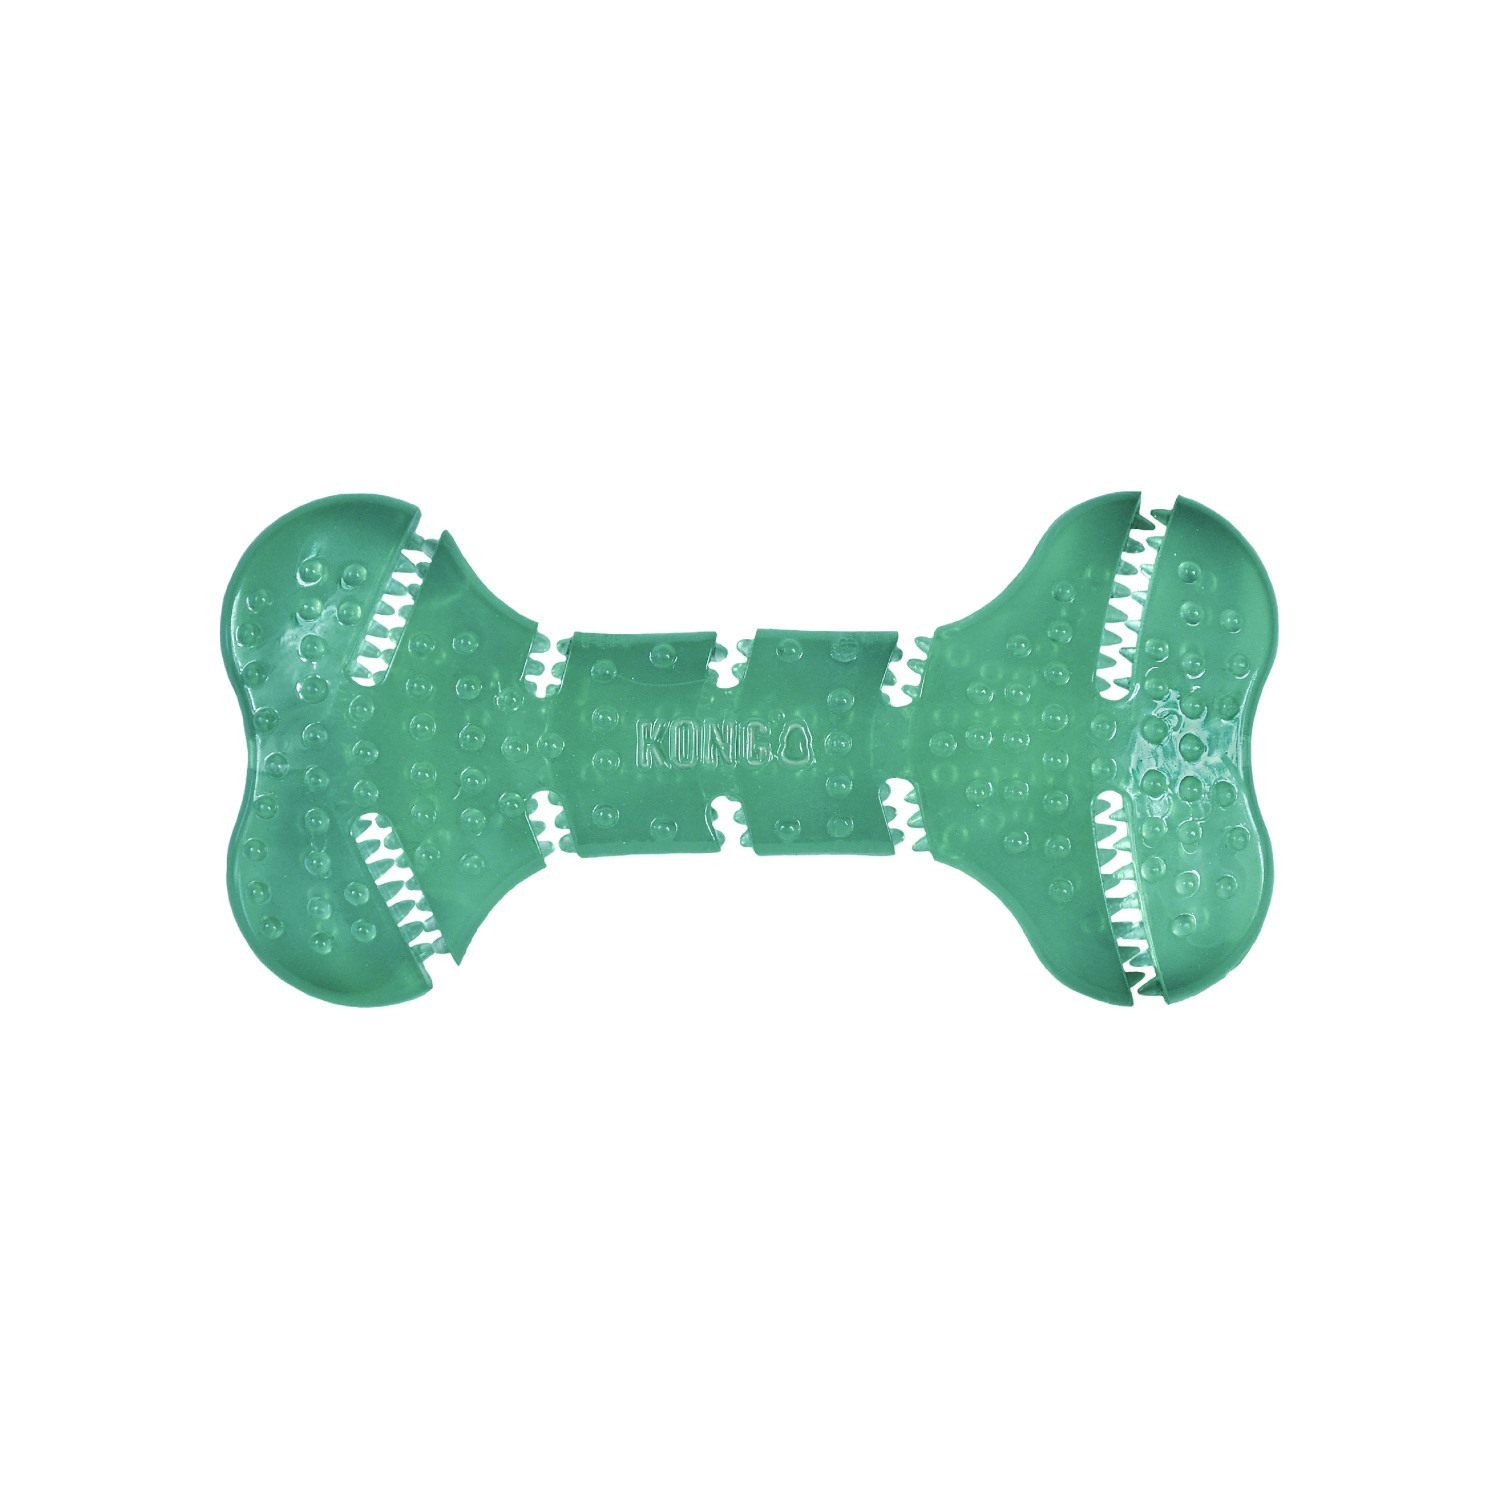 3 x KONG Squeezz Dental Bone Rubber Dog Toy image 0